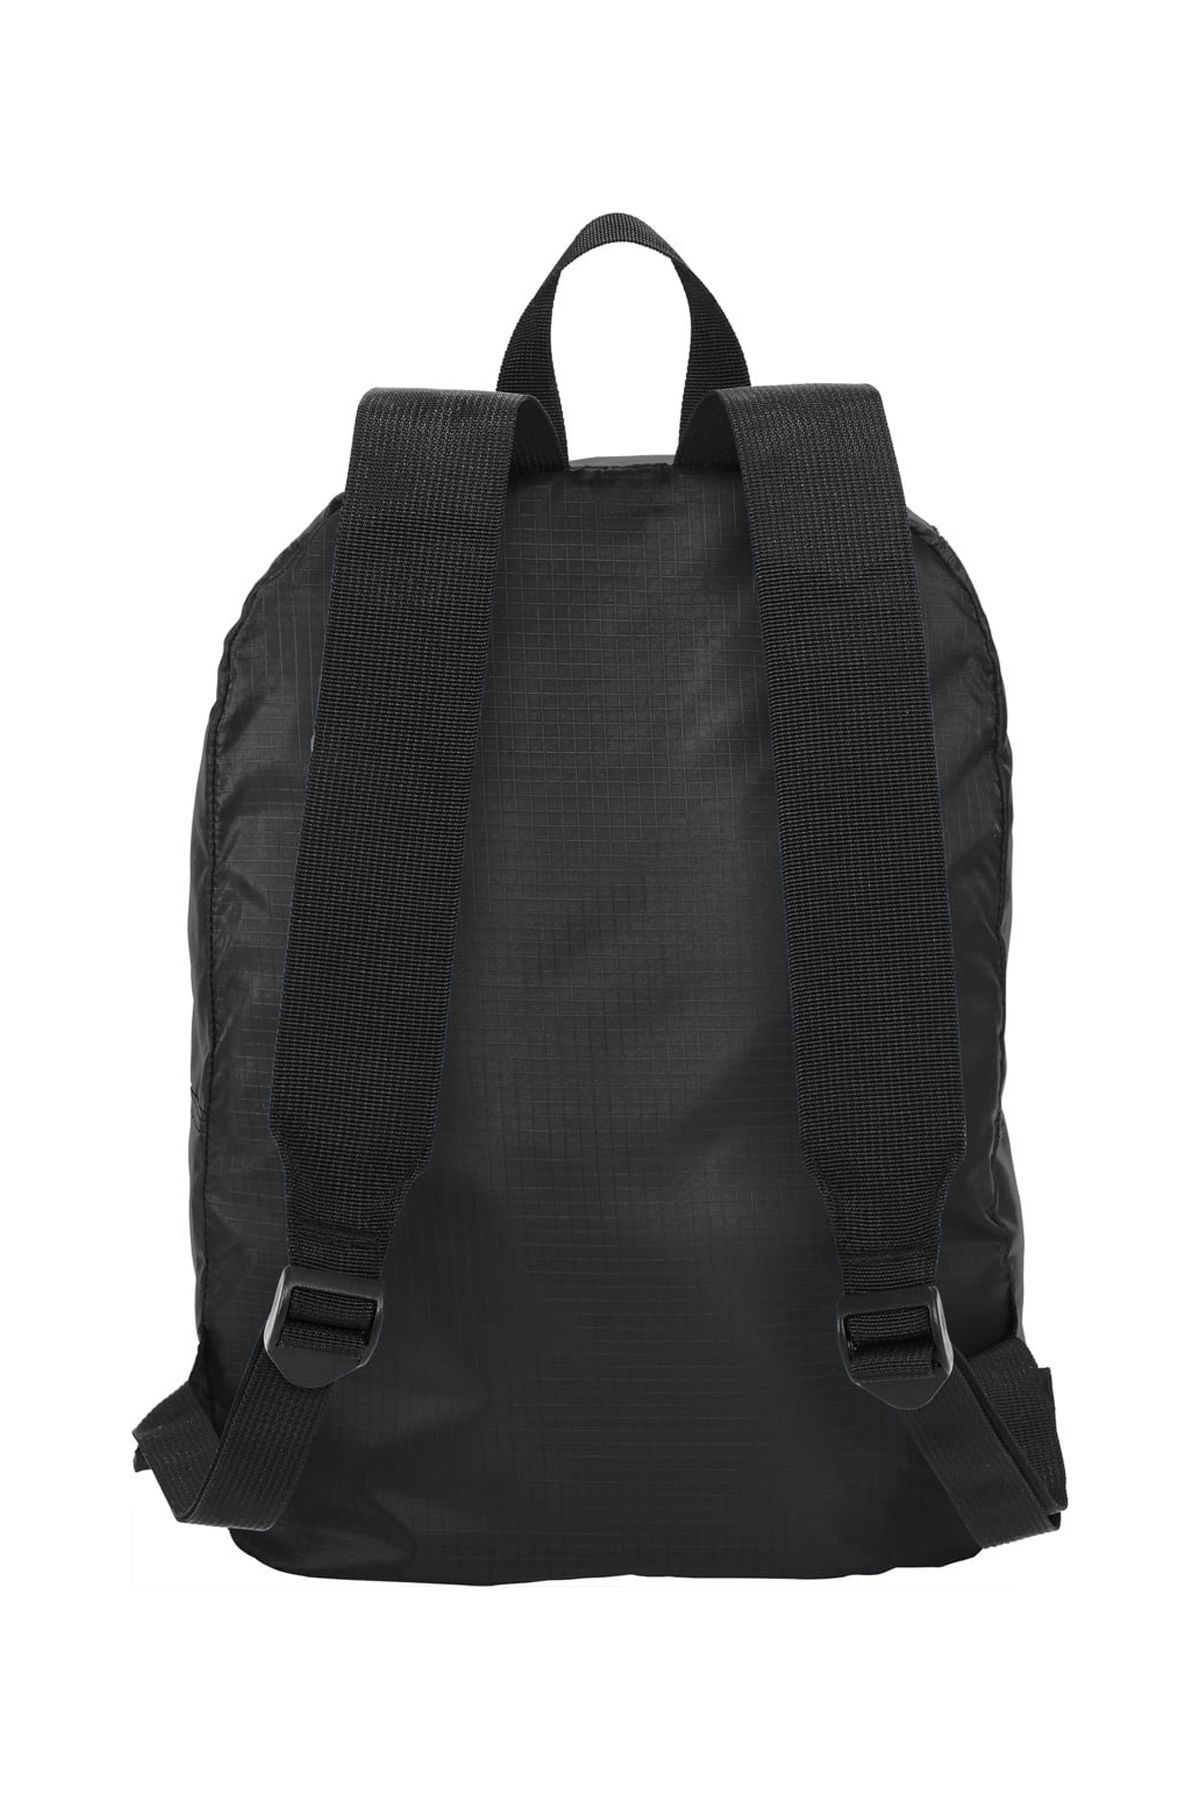 Port Authority Adult Unisex Plain Backpack Black One Size Fits All - image 2 of 2